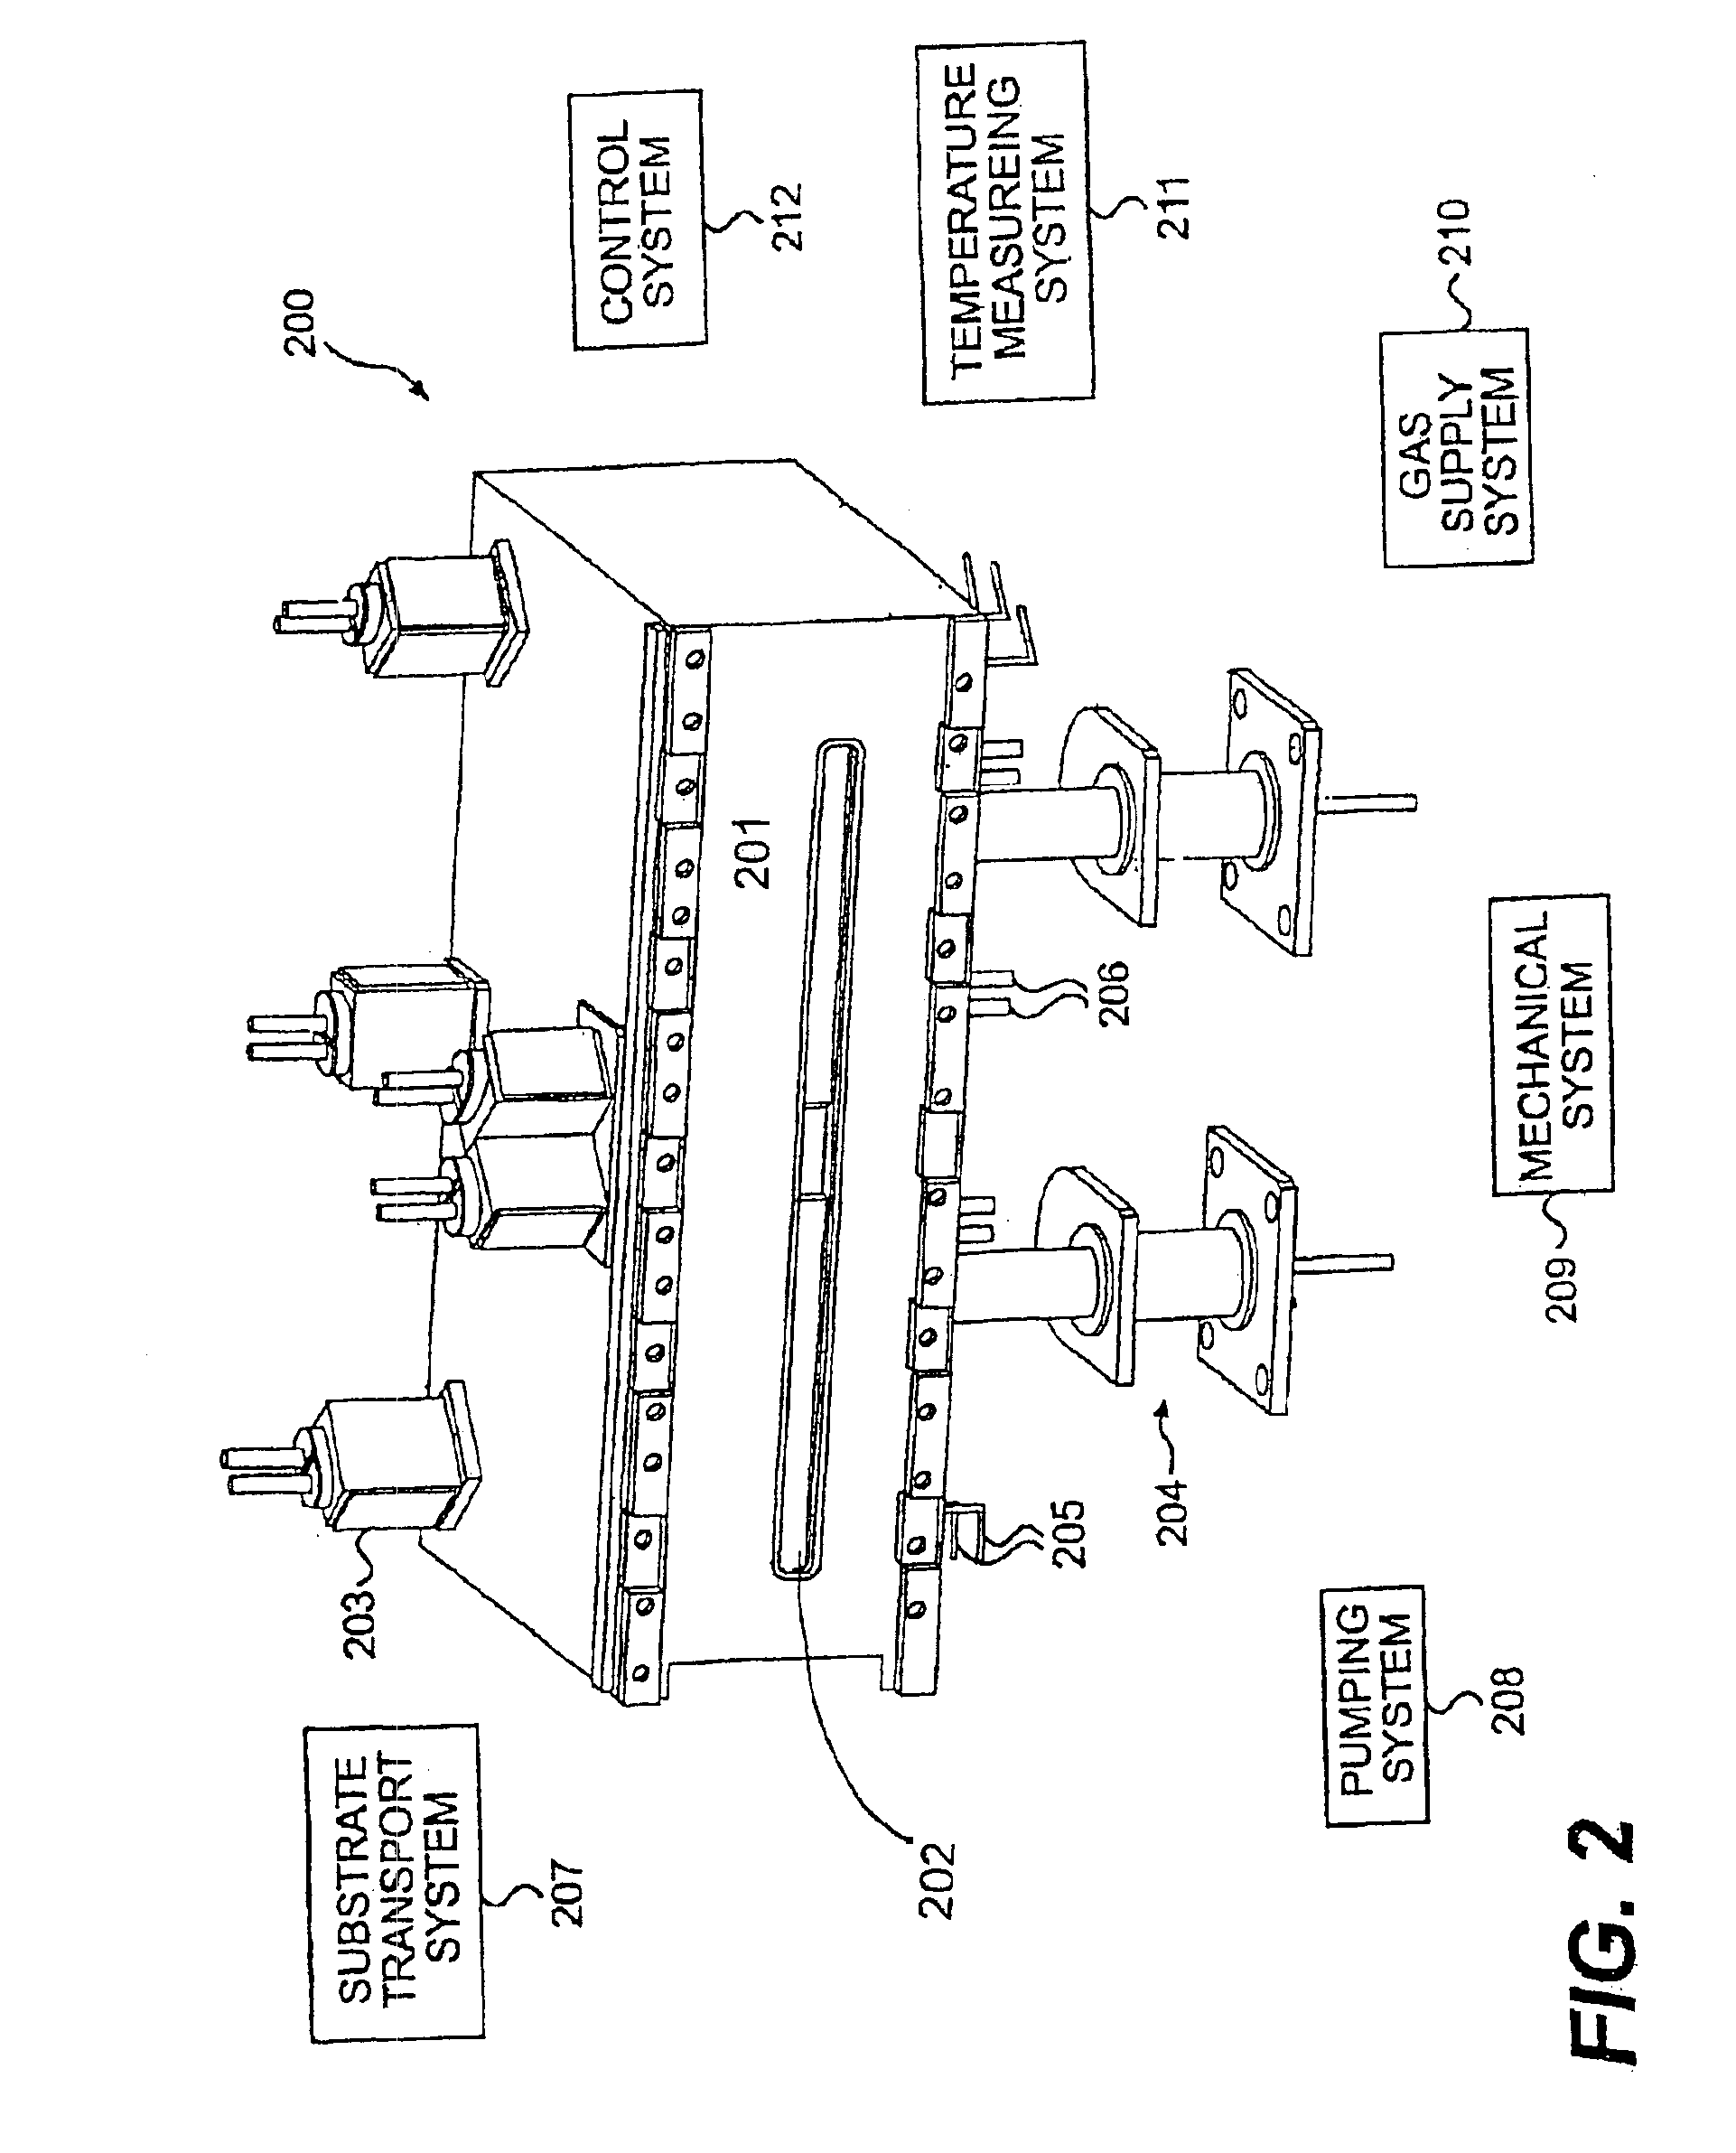 Systems and methods for epitaxially depositing films on a semiconductor substrate